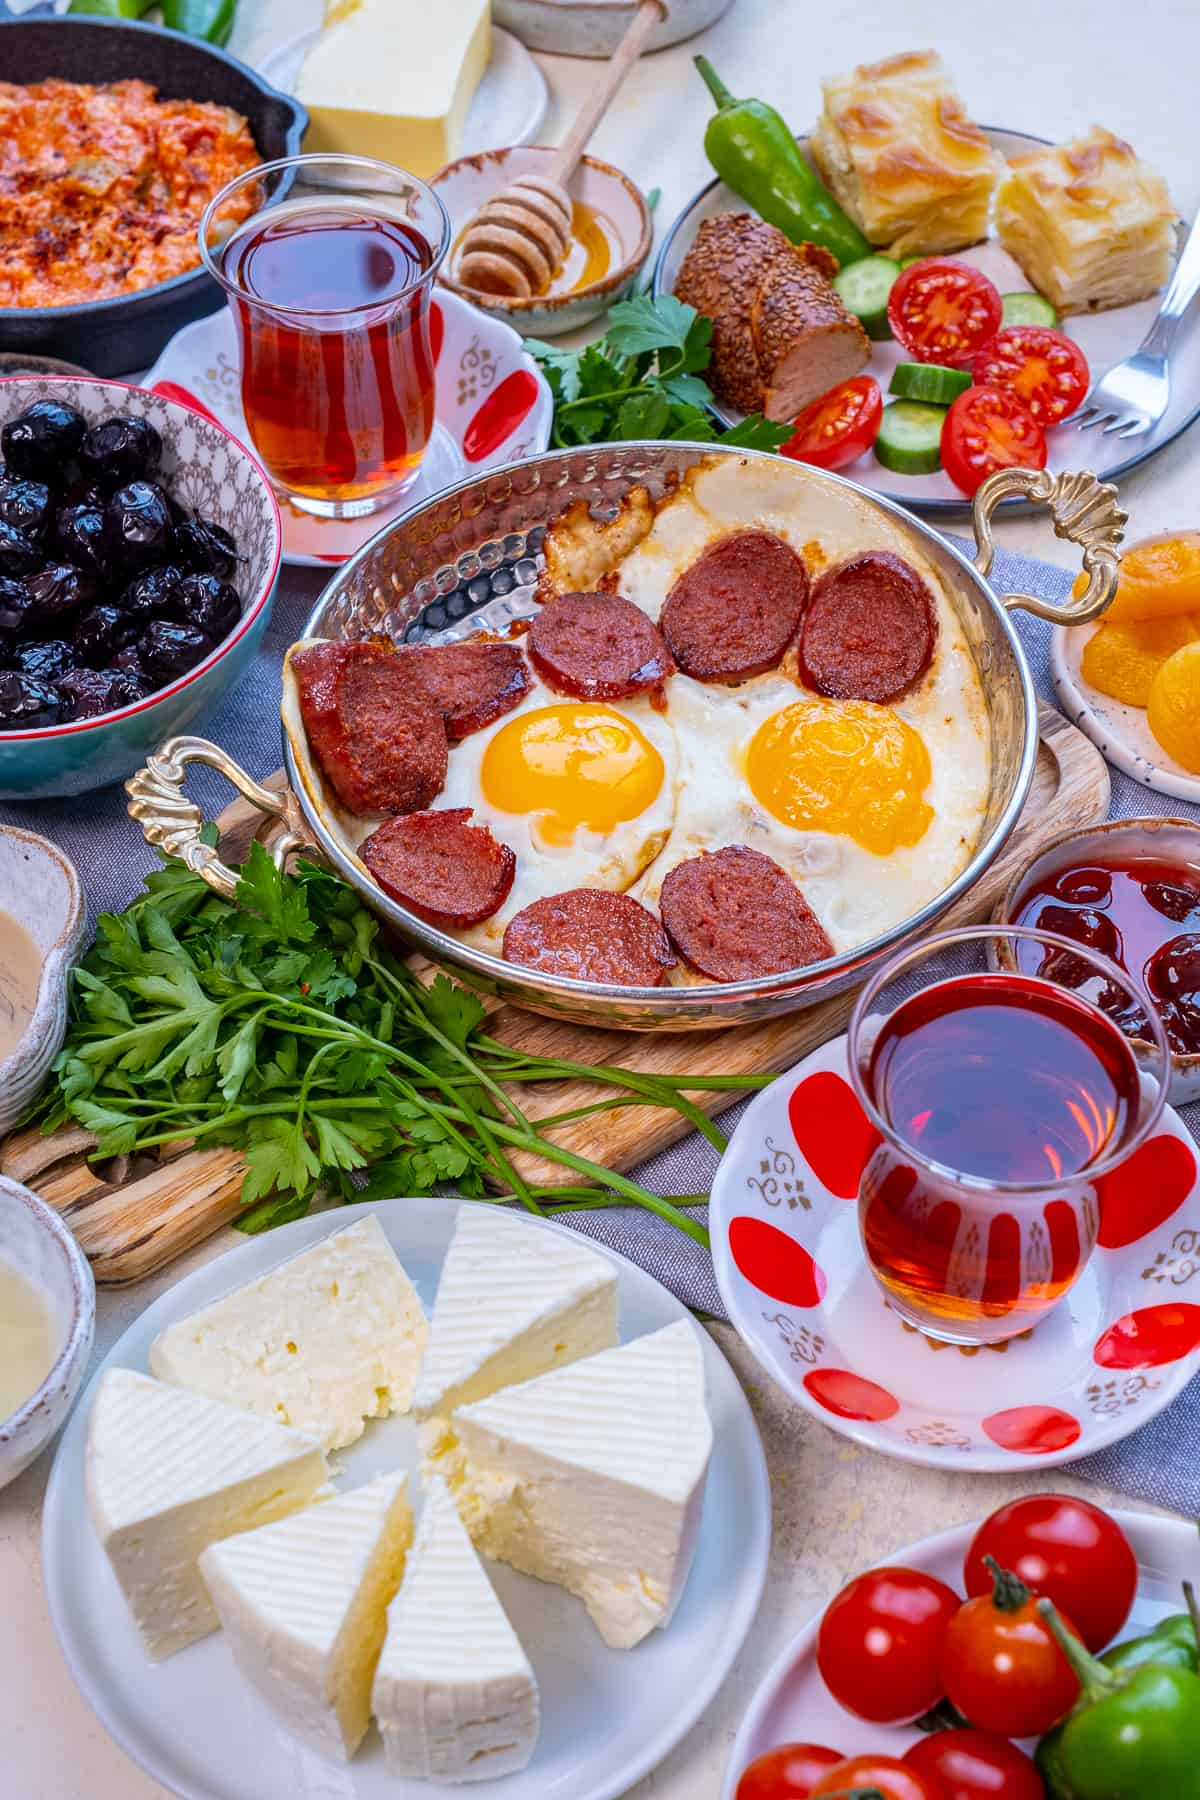 Turkish breakfast with eggs and sujuk, olives, cheese and Turkish tea in tulip glasses.